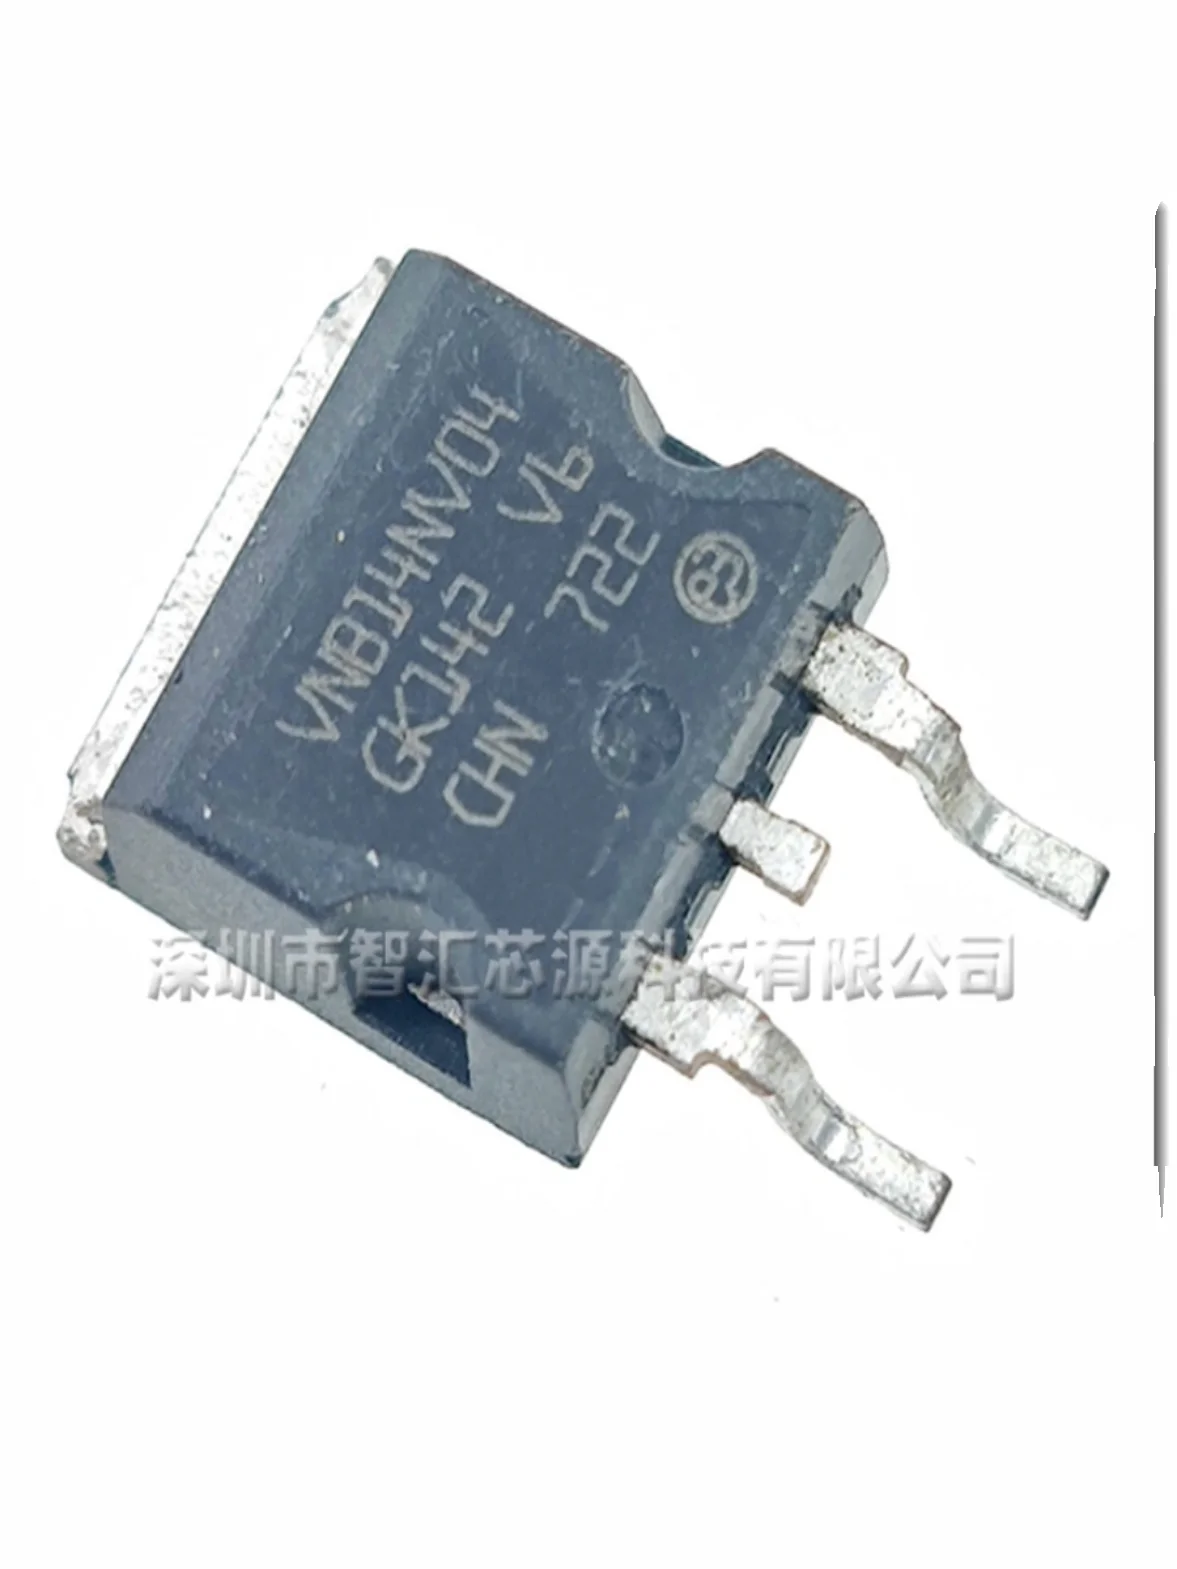 10 teile/los vnb14nv04 mosfet to-263 smd